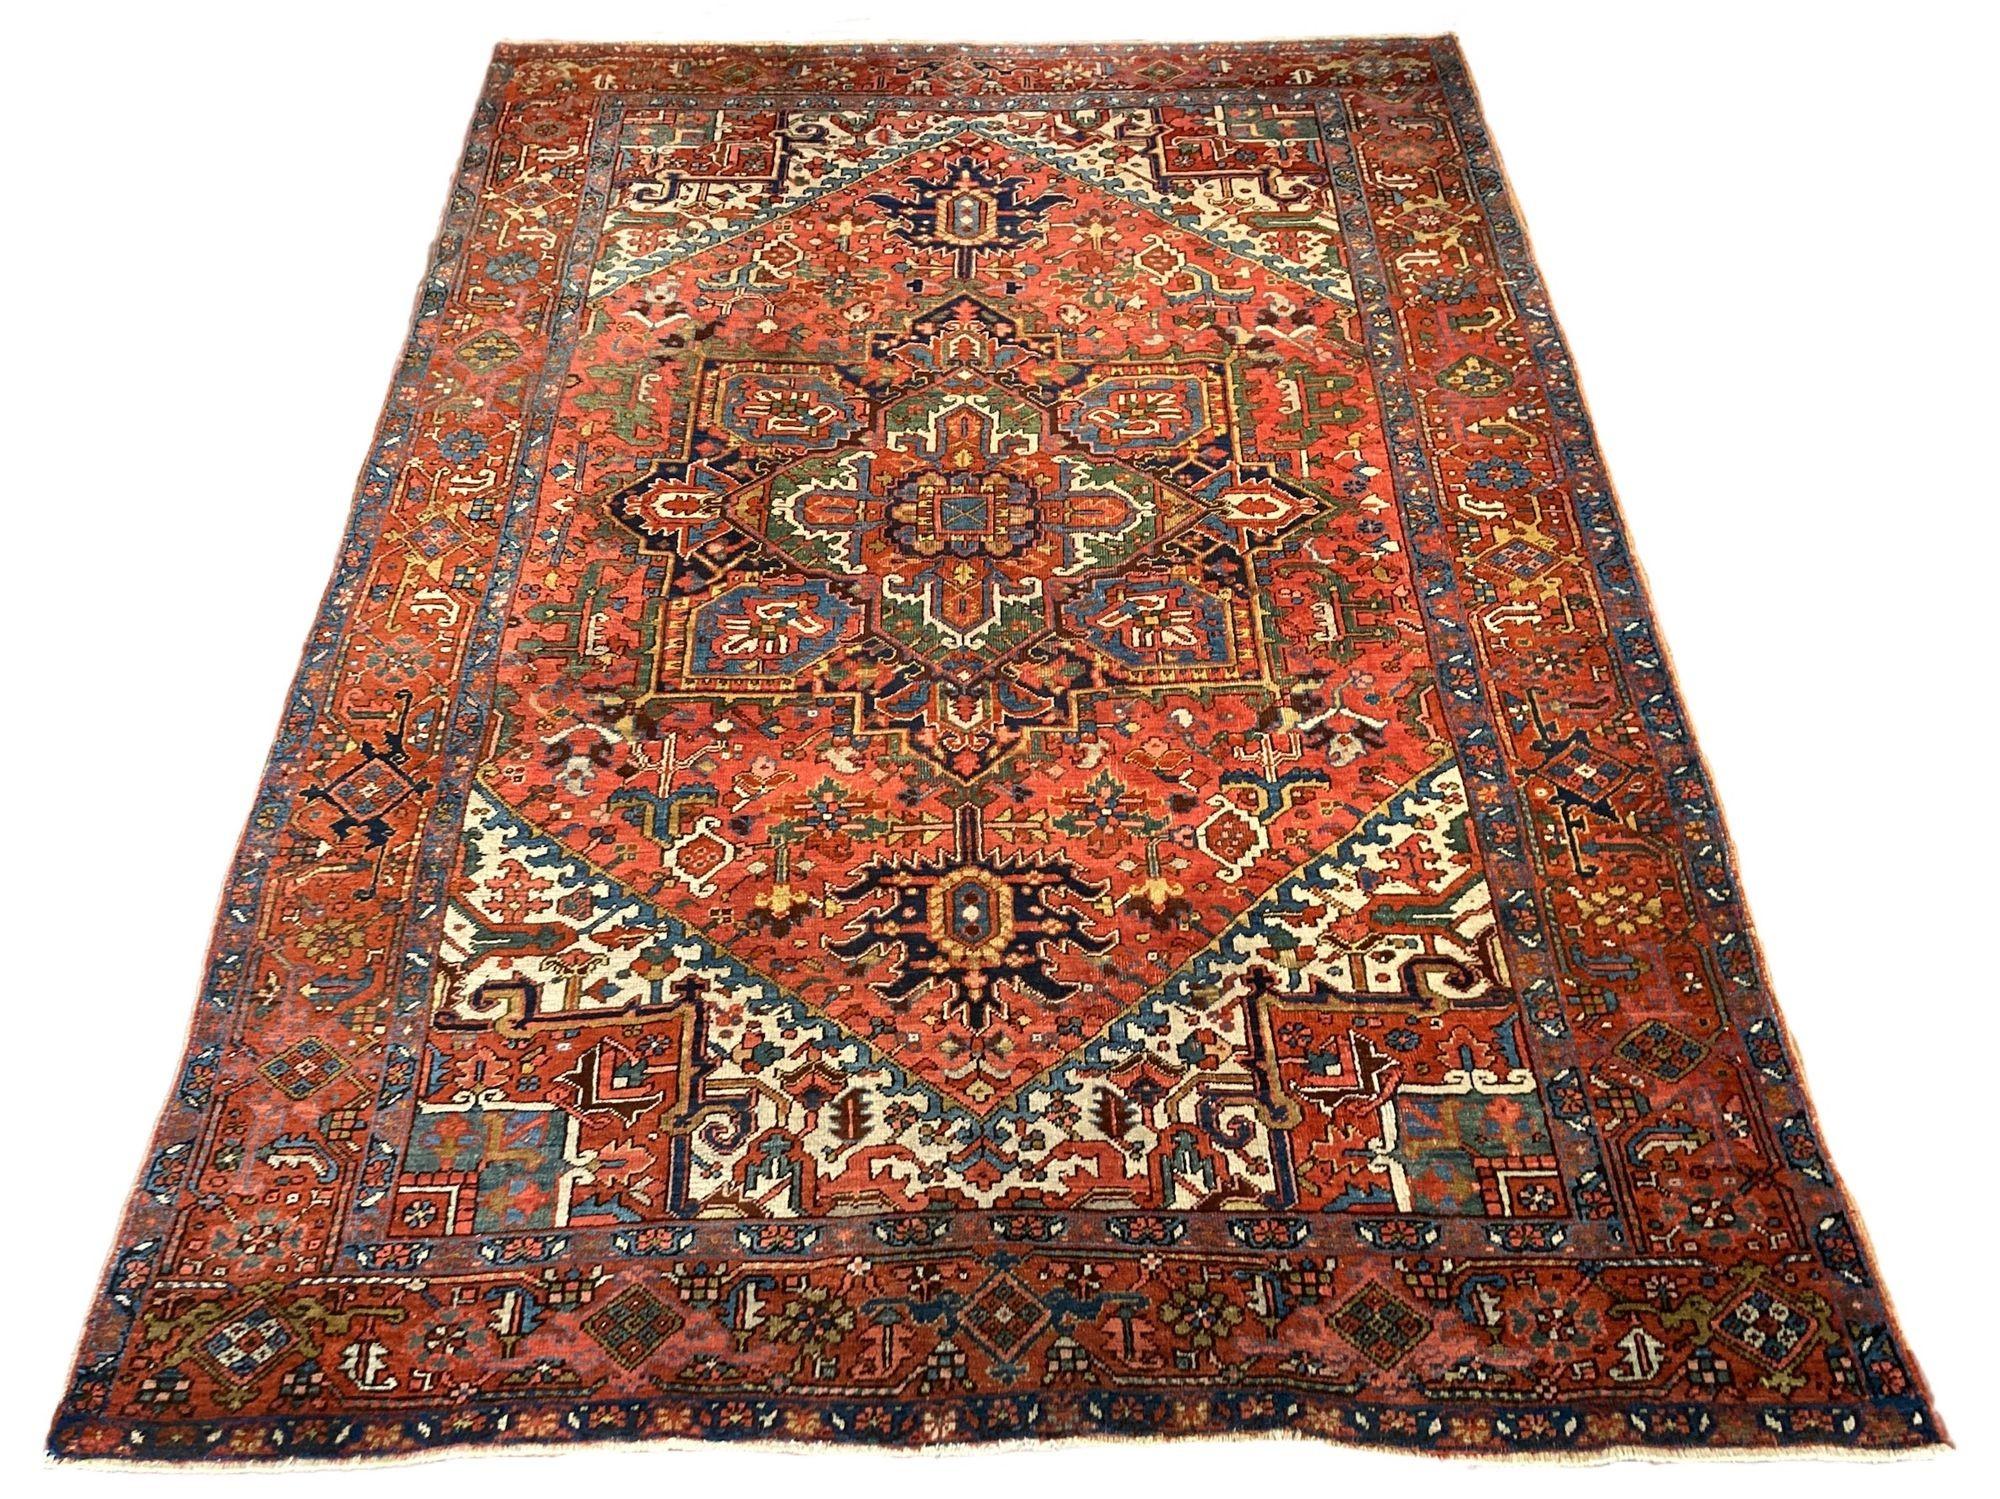 An outstanding antique Heriz carpet, handwoven circa 1920 with a traditional geometrical design on a terracotta field and, unusually, a similar coloured border. Some stunning secondary colours that would look fabulous in any interior.
Size: 3.41m x